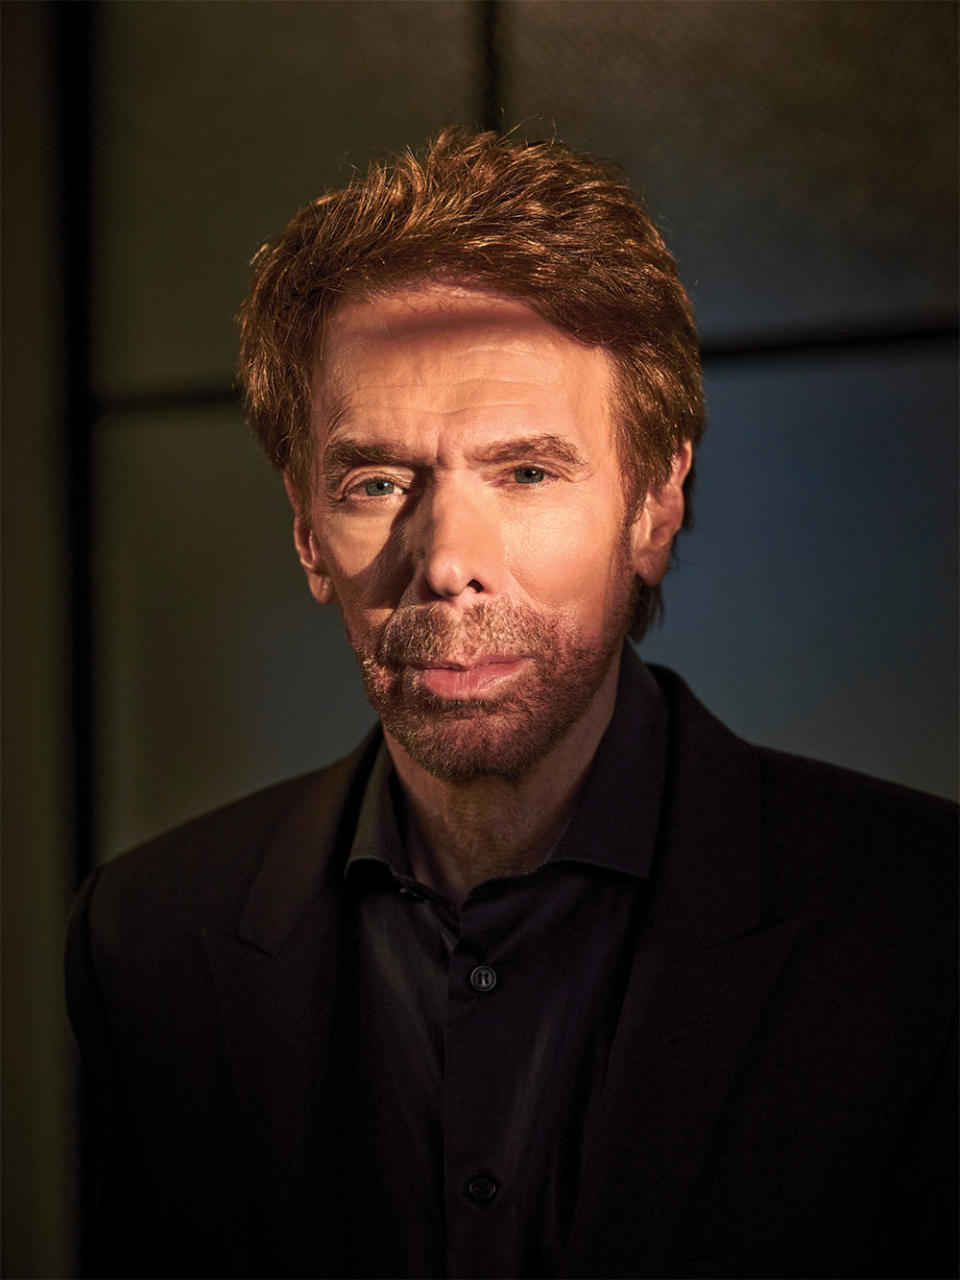 Jerry Bruckheimer, 79, poses for a portrait at the headquarters of his company, “Jerry Bruckheimer Films Inc.” in Santa Monica on November 23, 2022.